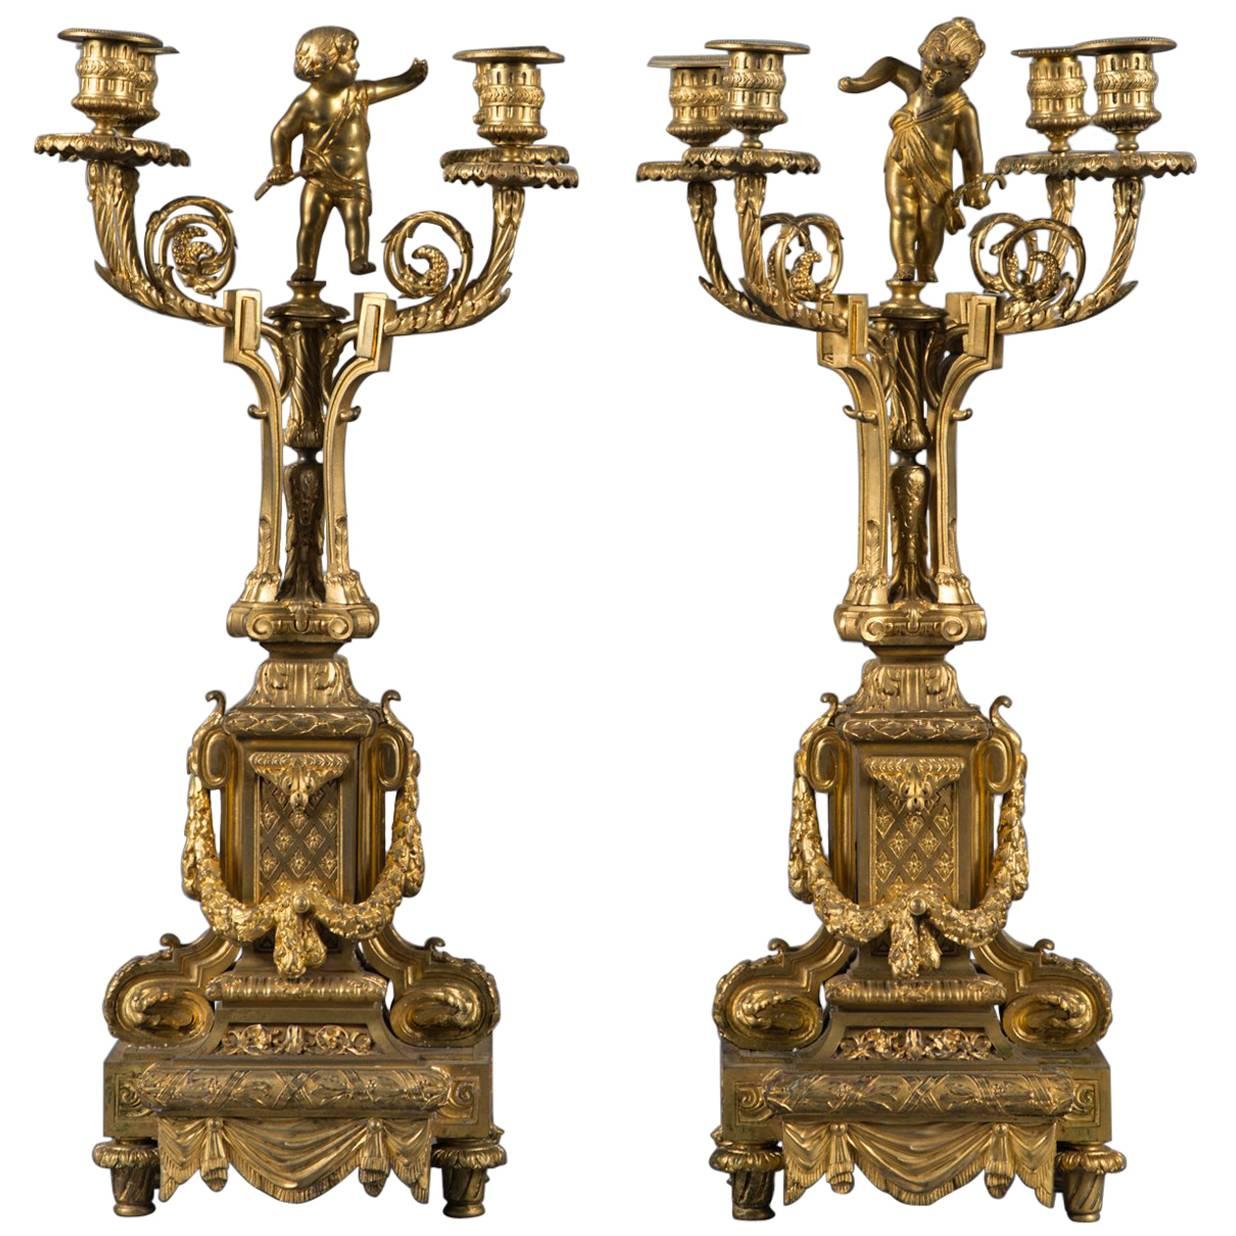 Pair of 19th Century French Gilt Bronze Four-Branch Figural Candelabras For Sale